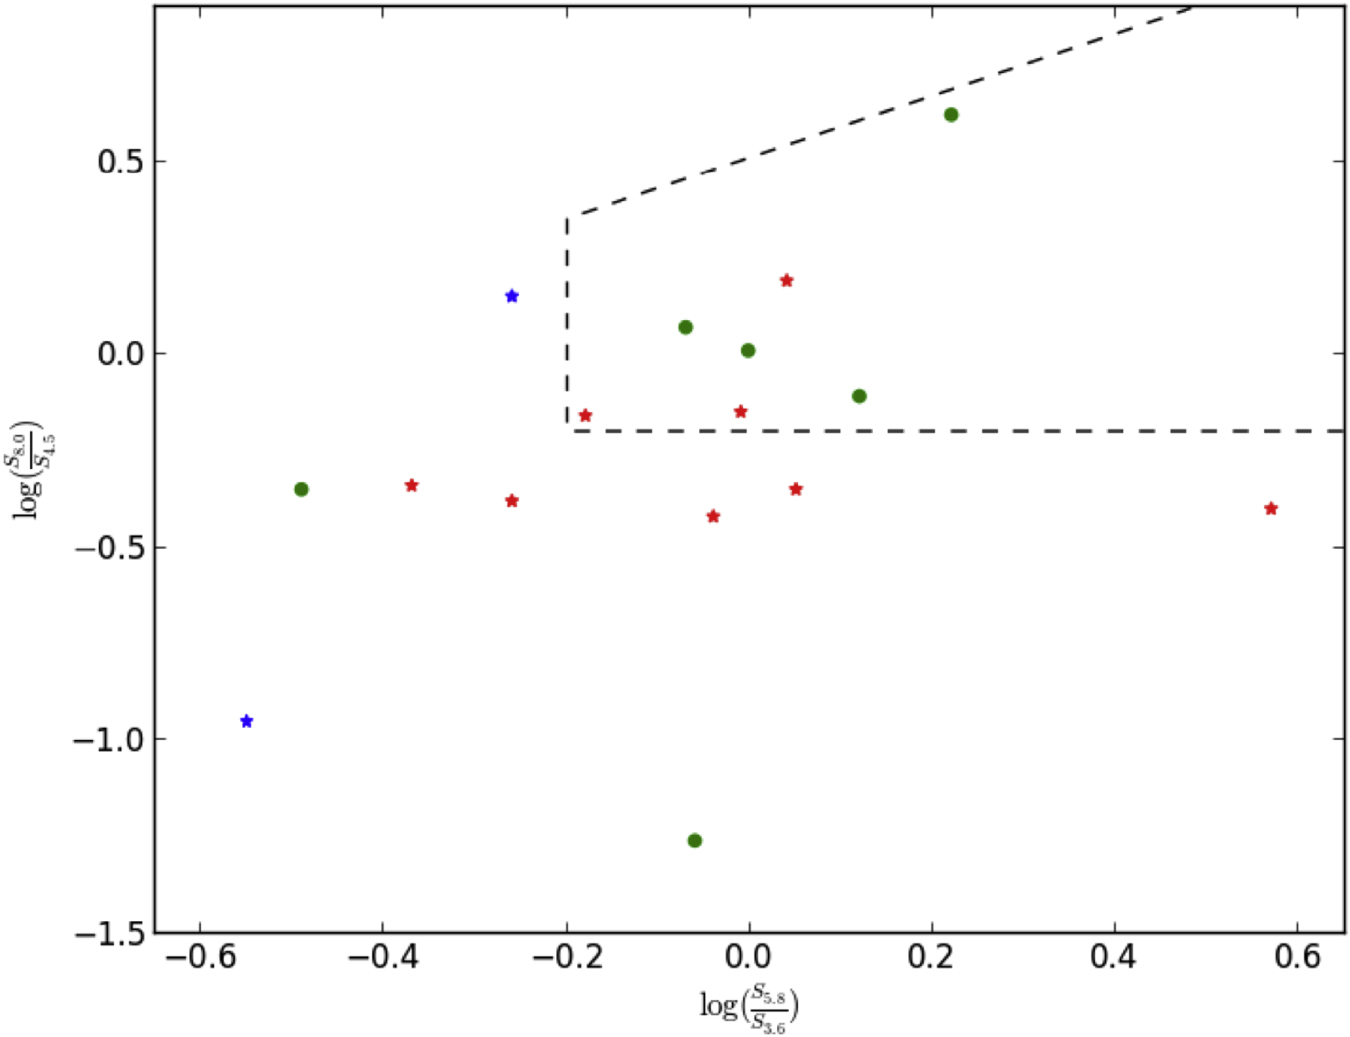 Color-color scatter plot of all the X-ray sources that were also detected in infrared observations of the galaxy NGC 45. The axes represent the log ratios of fluxes measured by two different pairs of channels on the Infrared Array Camera (IRAC) on Spitzer. The green circles correspond to the X-ray sources located outside of the visual extent of NGC 45, the red stars correspond to the X-ray sources located within the visual extent of NGC 45, and the blue stars correspond to the radio sources detected by our <a href='http://iopscience.iop.org/article/10.1088/0004-6256/150/3/91/meta'>(Pannuti et al. 2015)</a> radio observations that were also detected by IRAC. The wedge <a href='http://iopscience.iop.org/article/10.1086/432894/meta'> (Lacy et al. 2005) </a> on the top-right encloses sources that are within the field of view covered by NGC 45 but are actually extragalactic in origin and probably background galaxies.